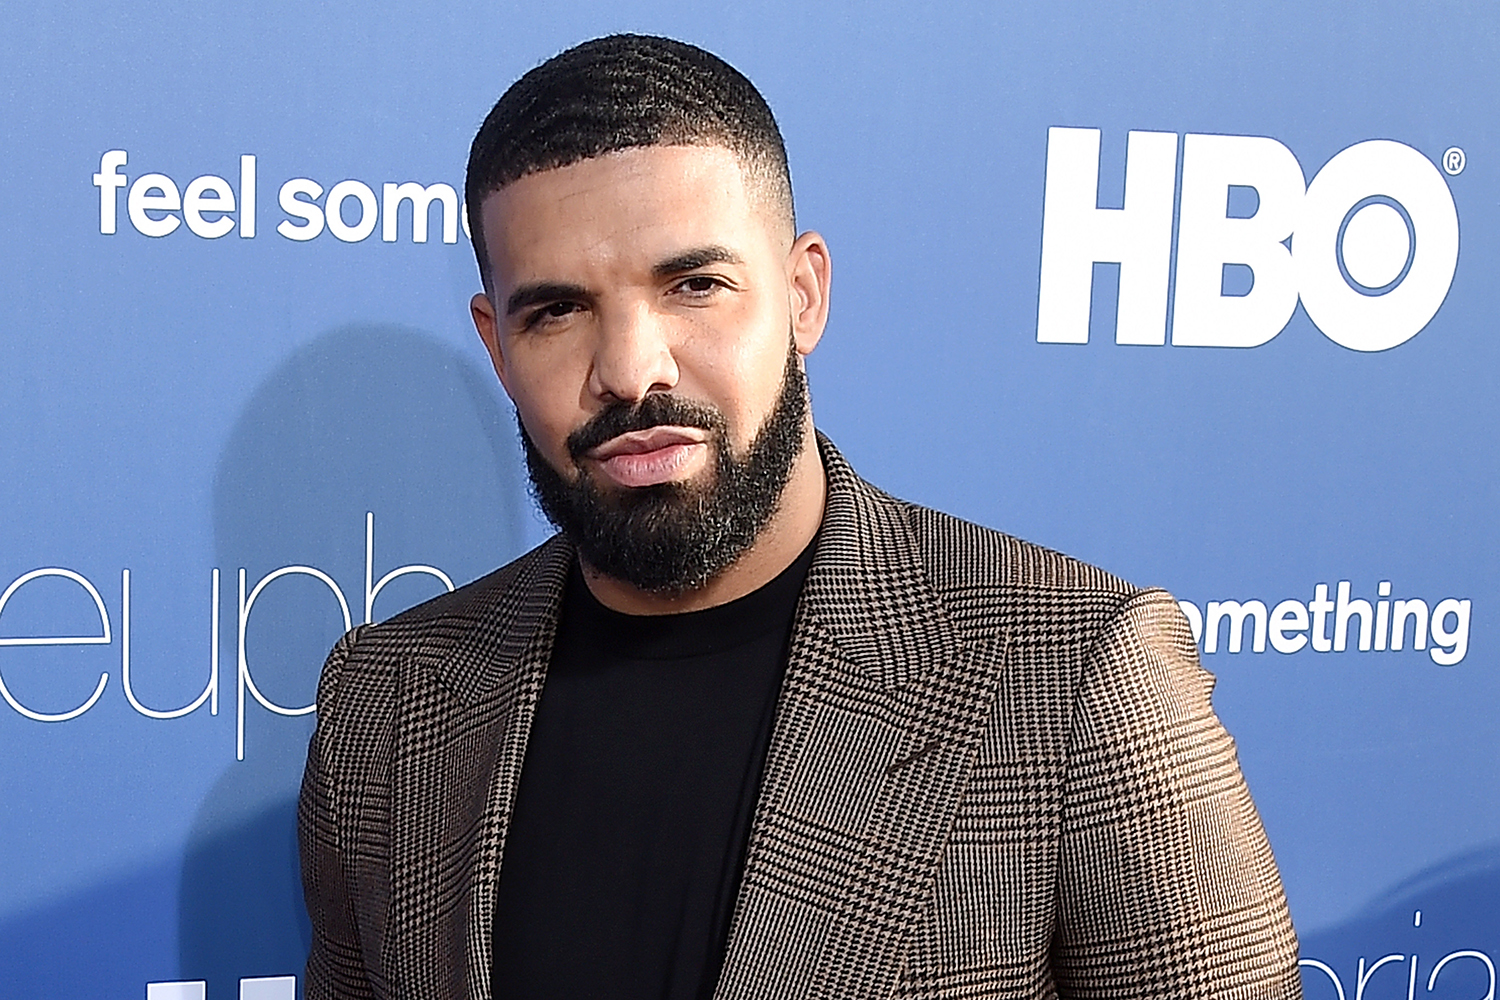 Drake Debuts Braided Hairstyle in New Photos